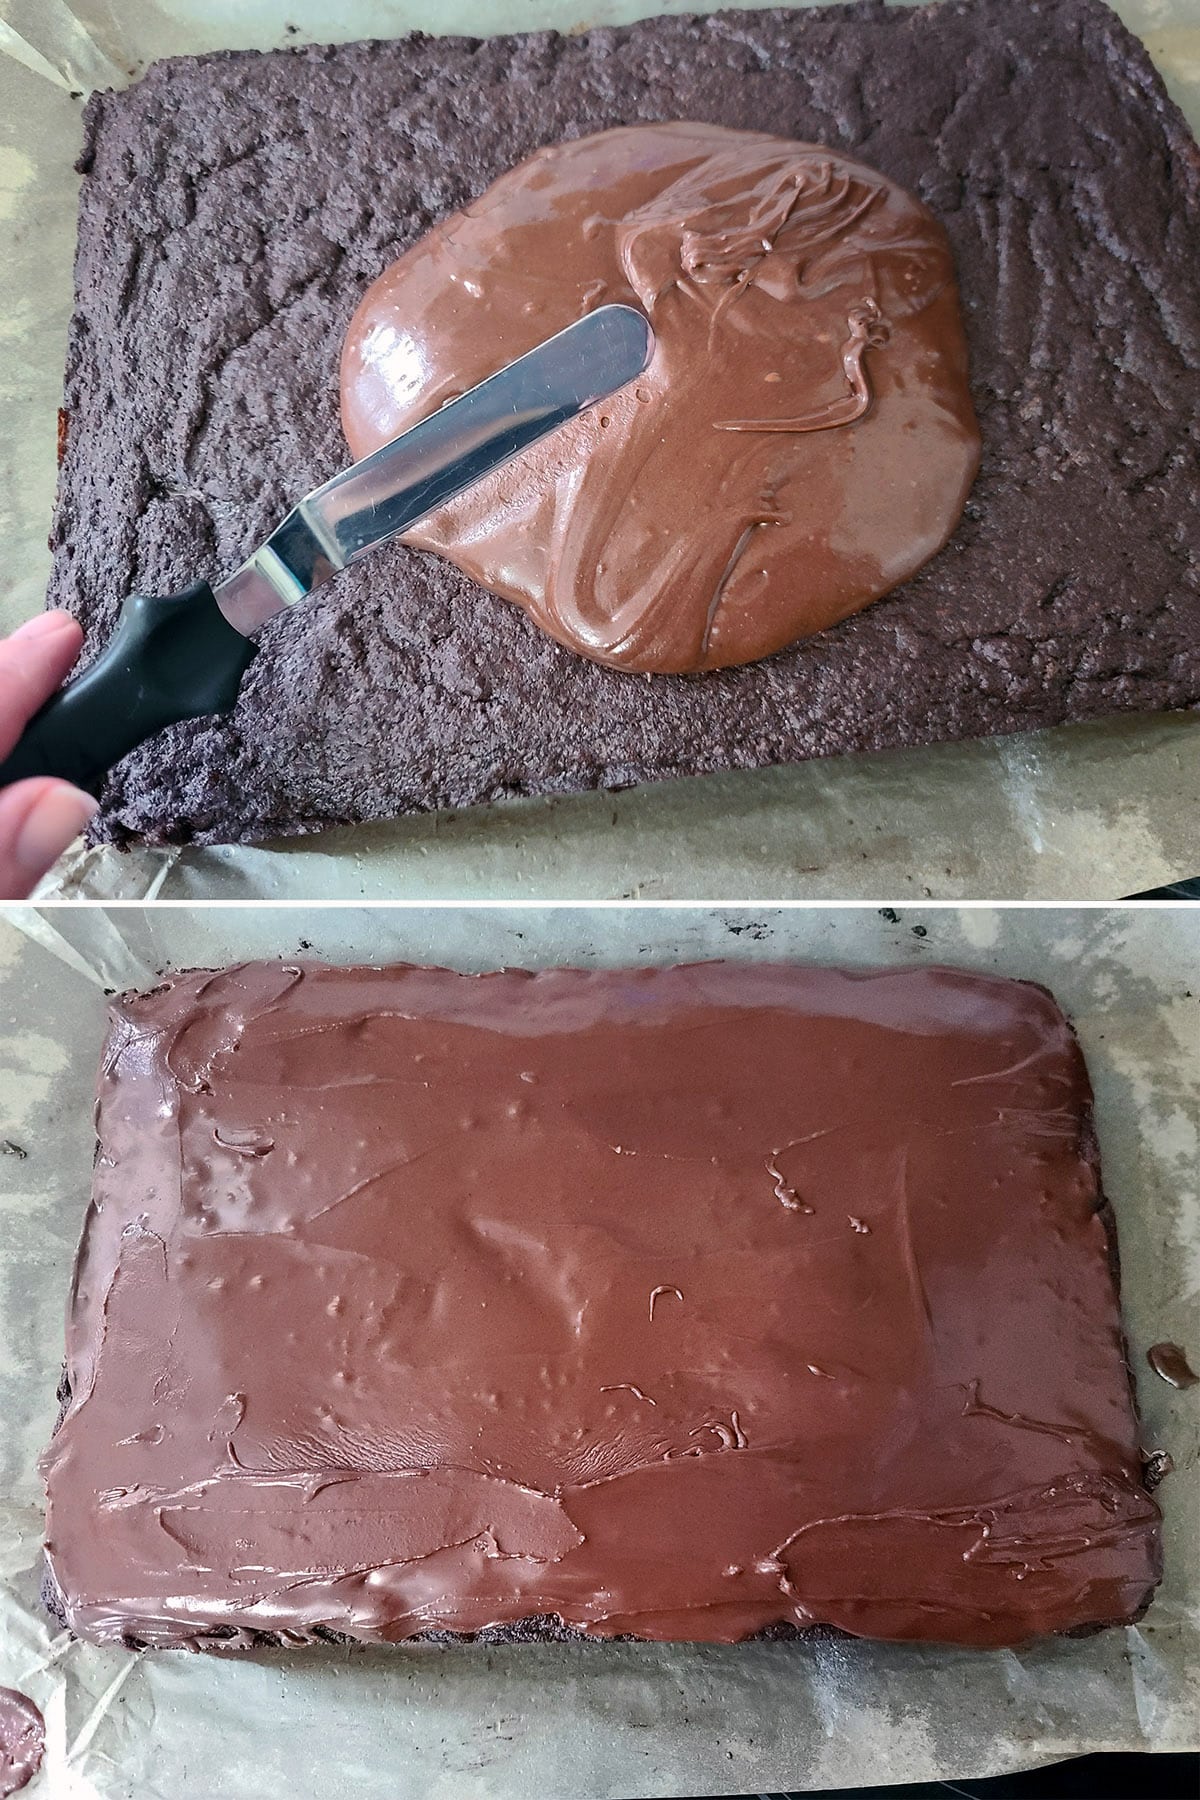 A 2 part image showing the warm glaze being spread on the slab of brownie.